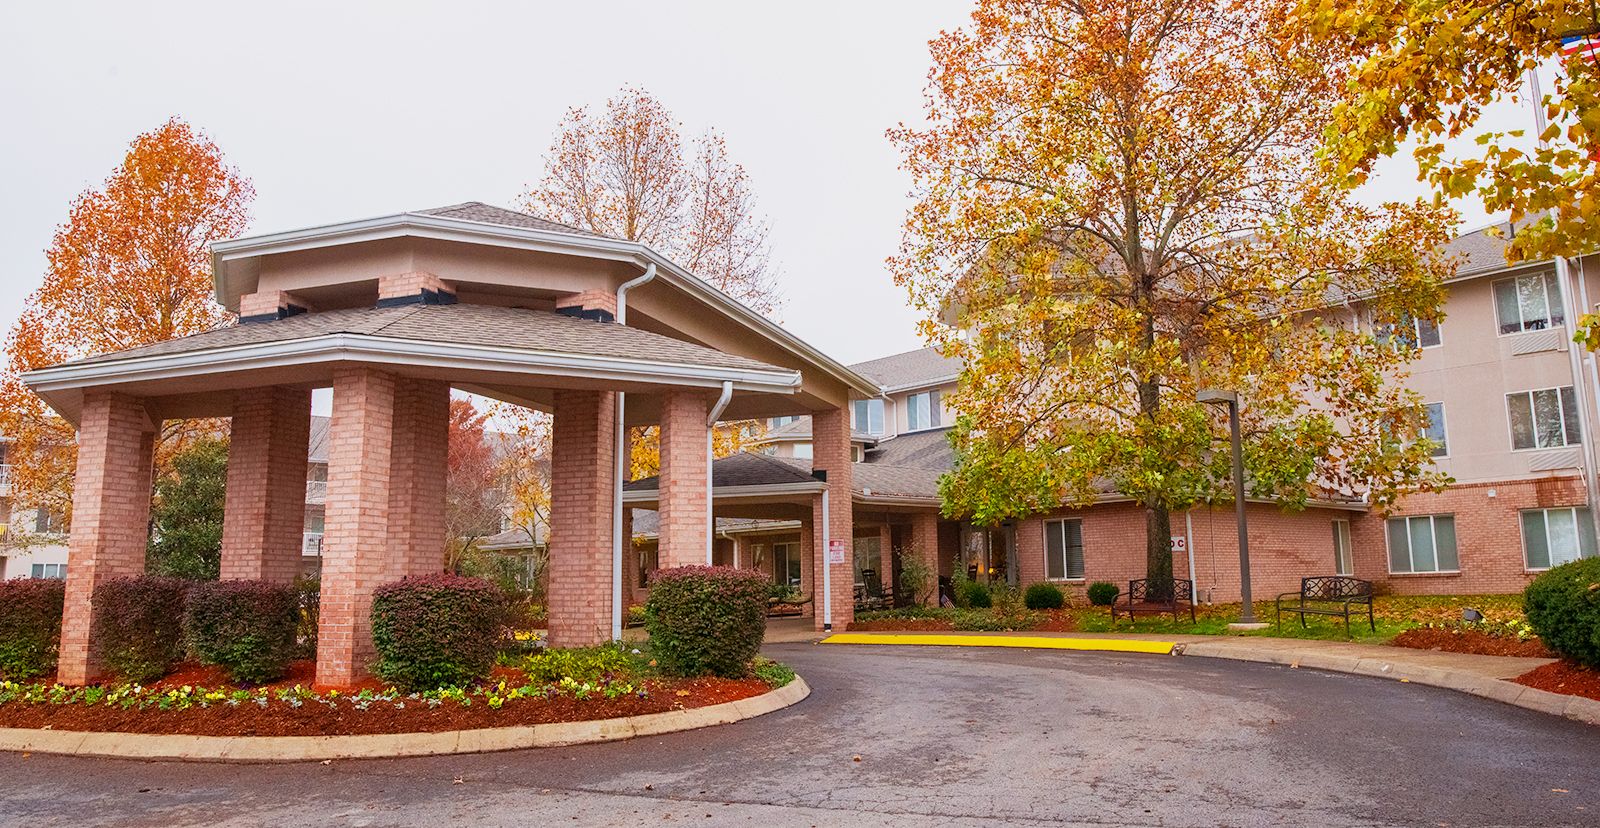 Autumn view of Manor at Steeplechase, a senior living community in a suburban city neighborhood.